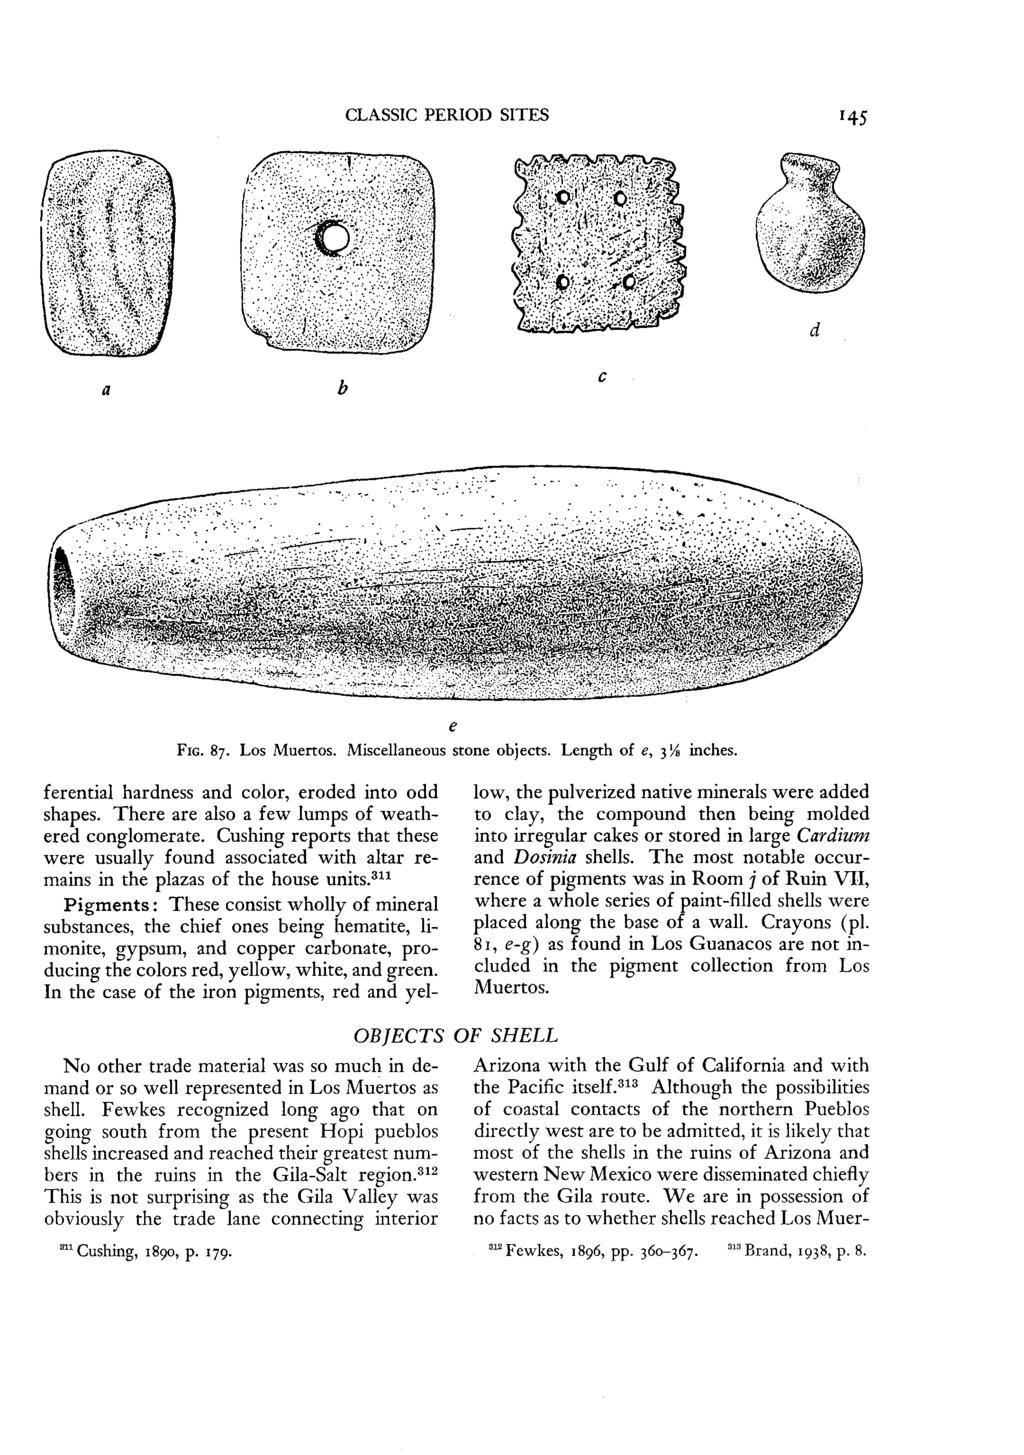 CLASSIC PERIOD SITES 1 45 d a FIG. 87. Los Muertos. Miscellaneous stone objects. Length of e, 3 1/8 inches. ferential hardness and color, eroded into odd shapes.